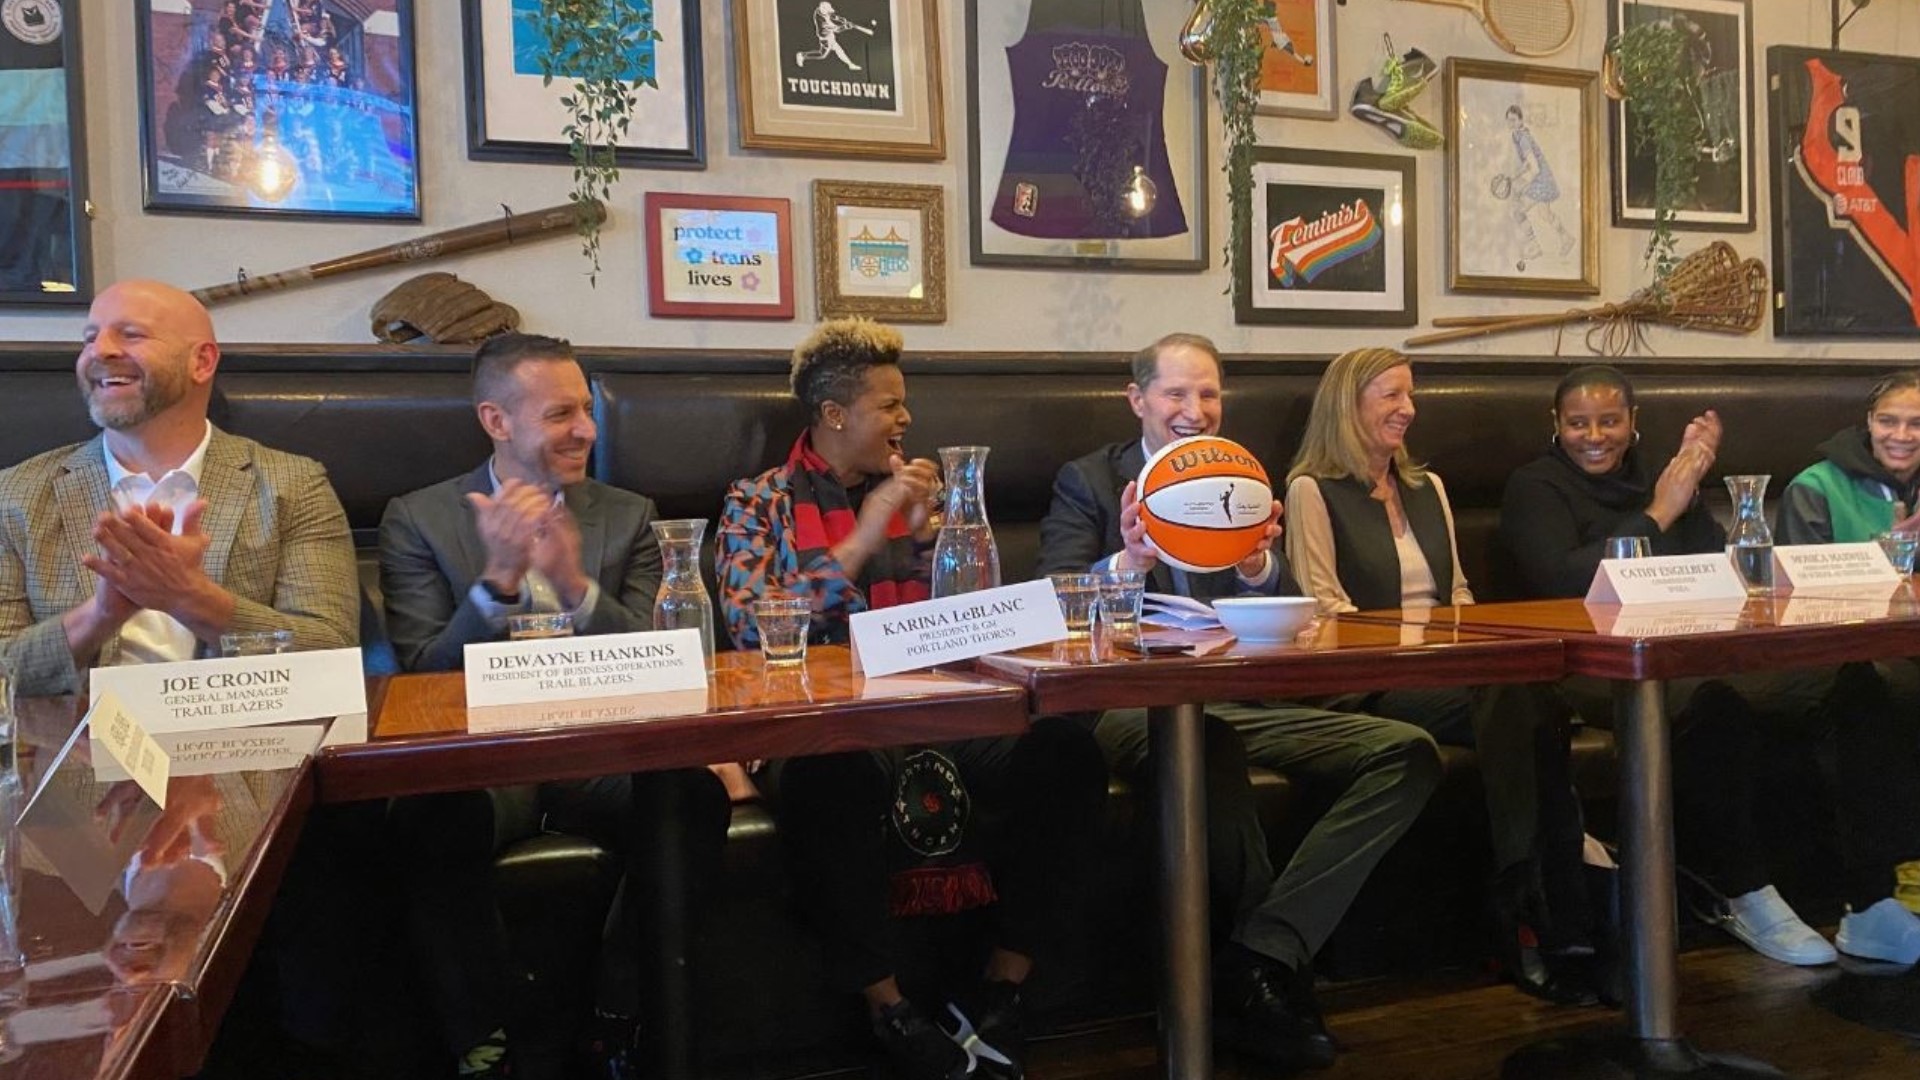 Heavy hitters in the Oregon sports world got the chance to make a pitch directly to the WNBA league's commissioner.